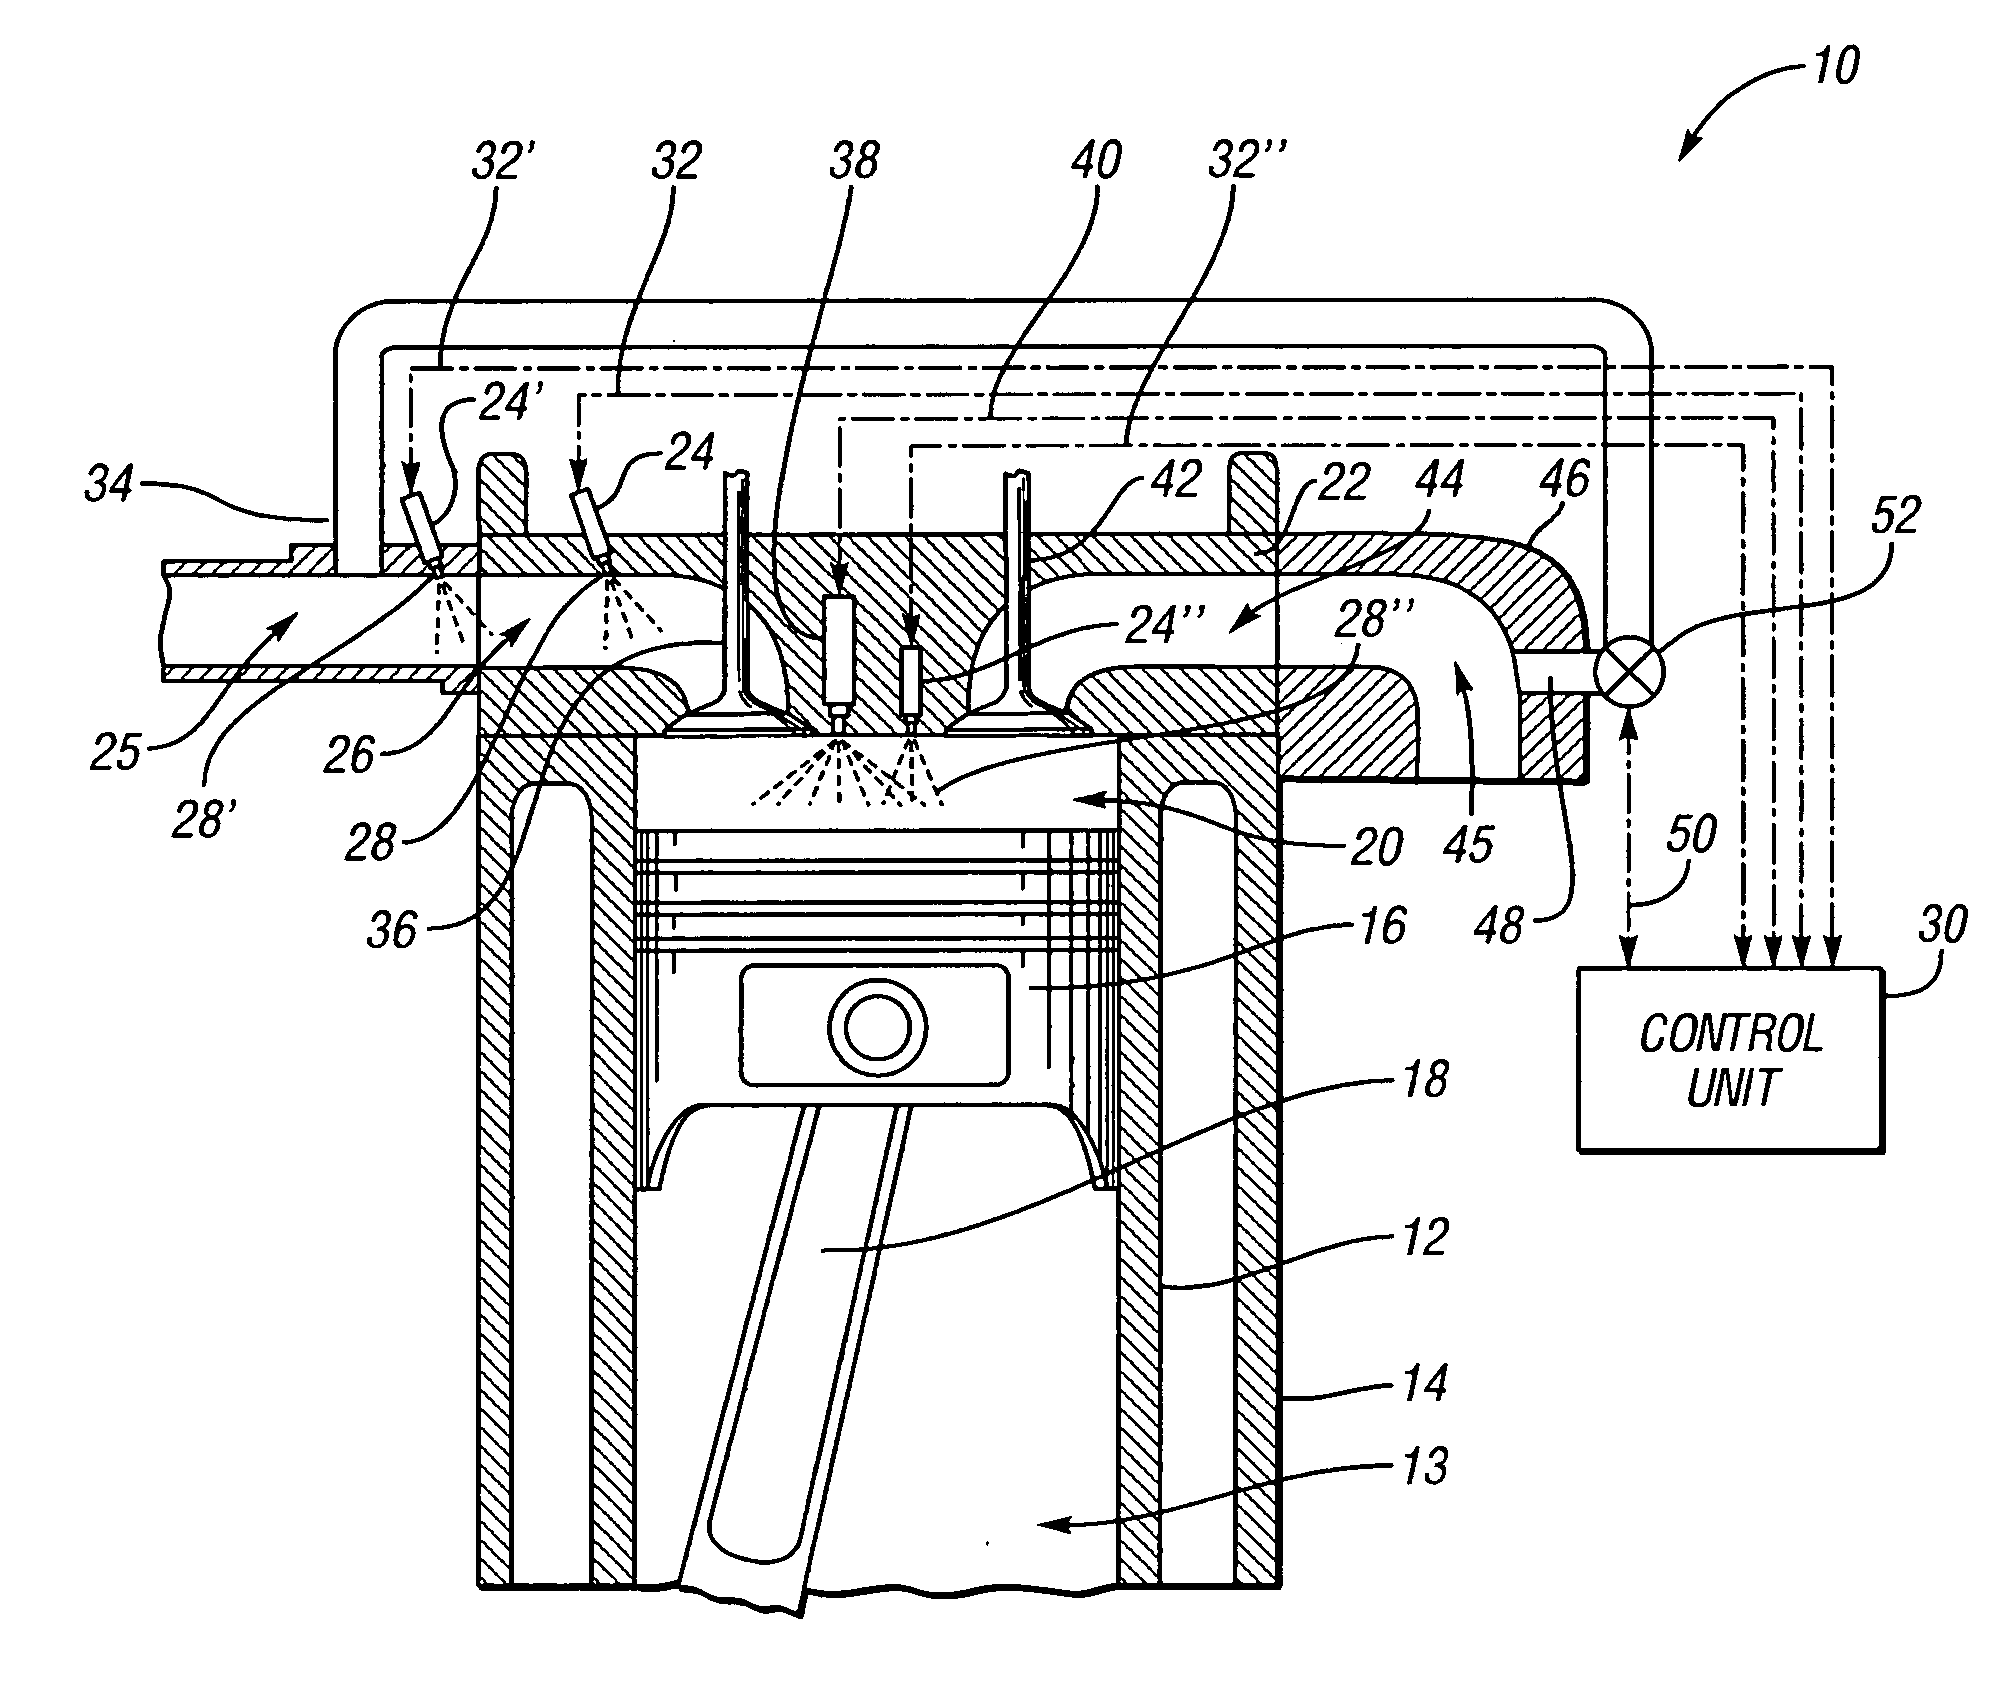 Compression-ignited IC engine and method of operation